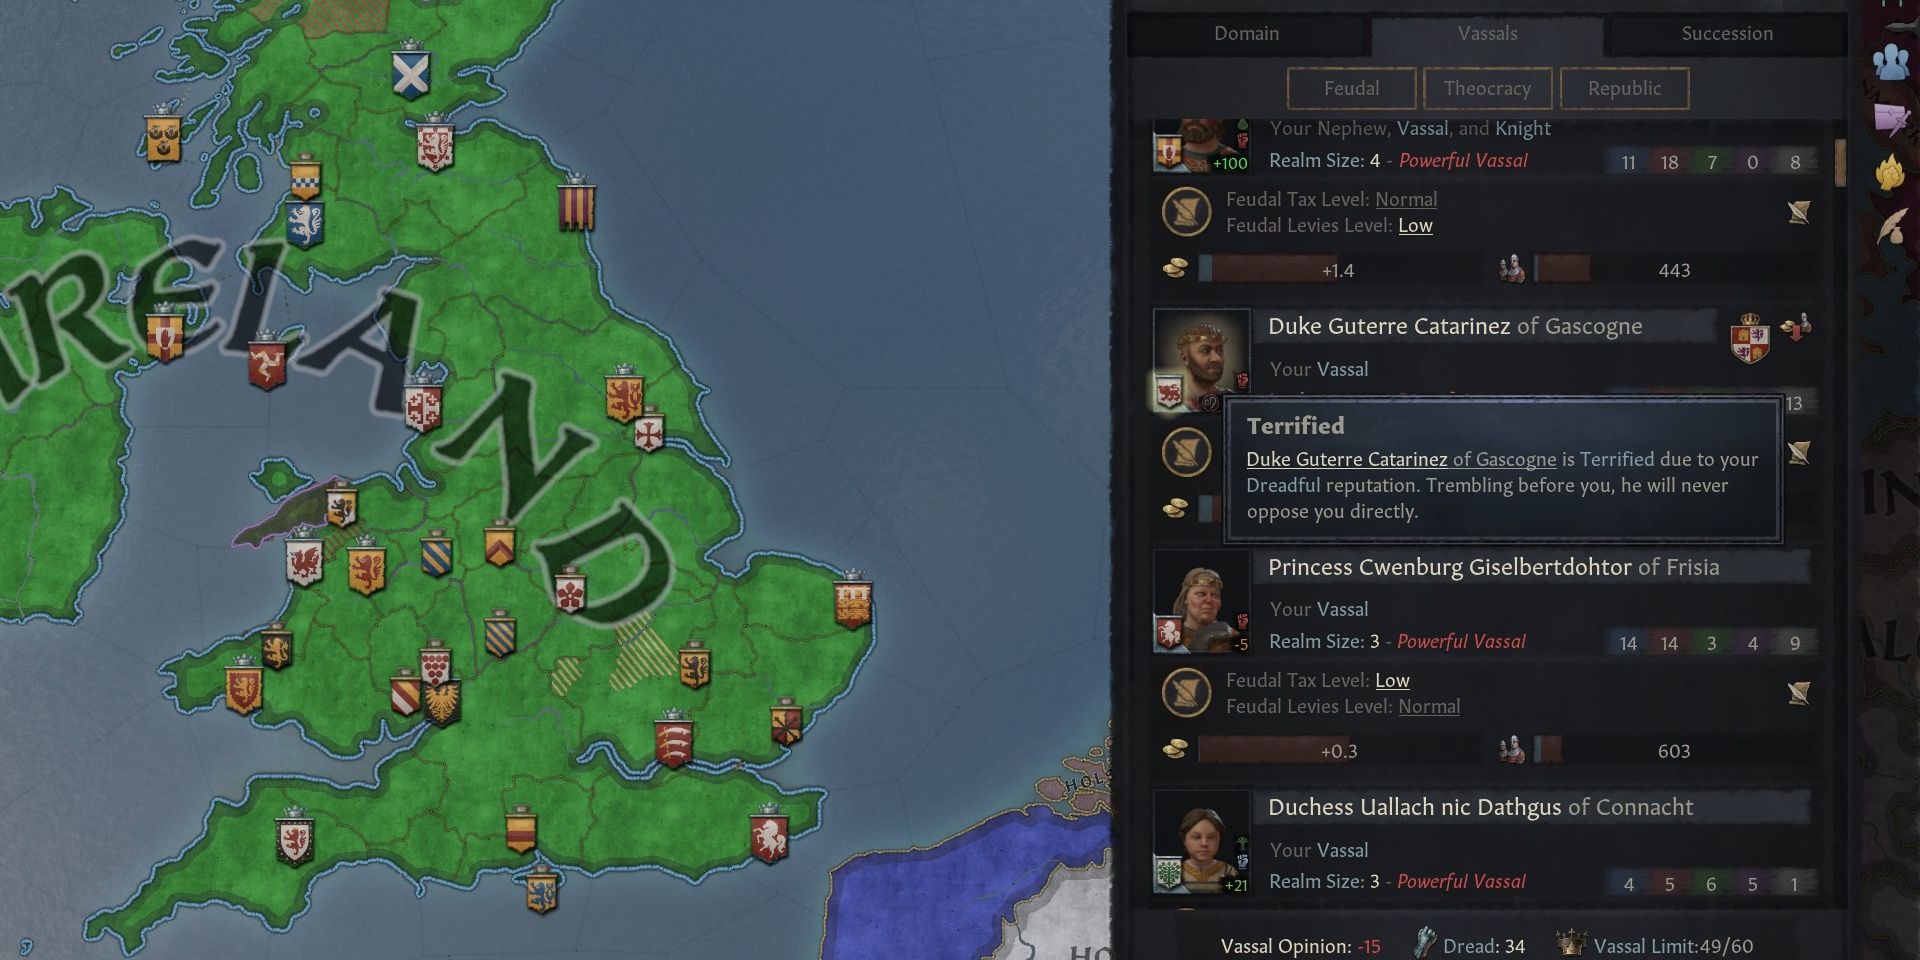 Vassal Opinions In The Empire Of Ireland From Crusader Kings 3